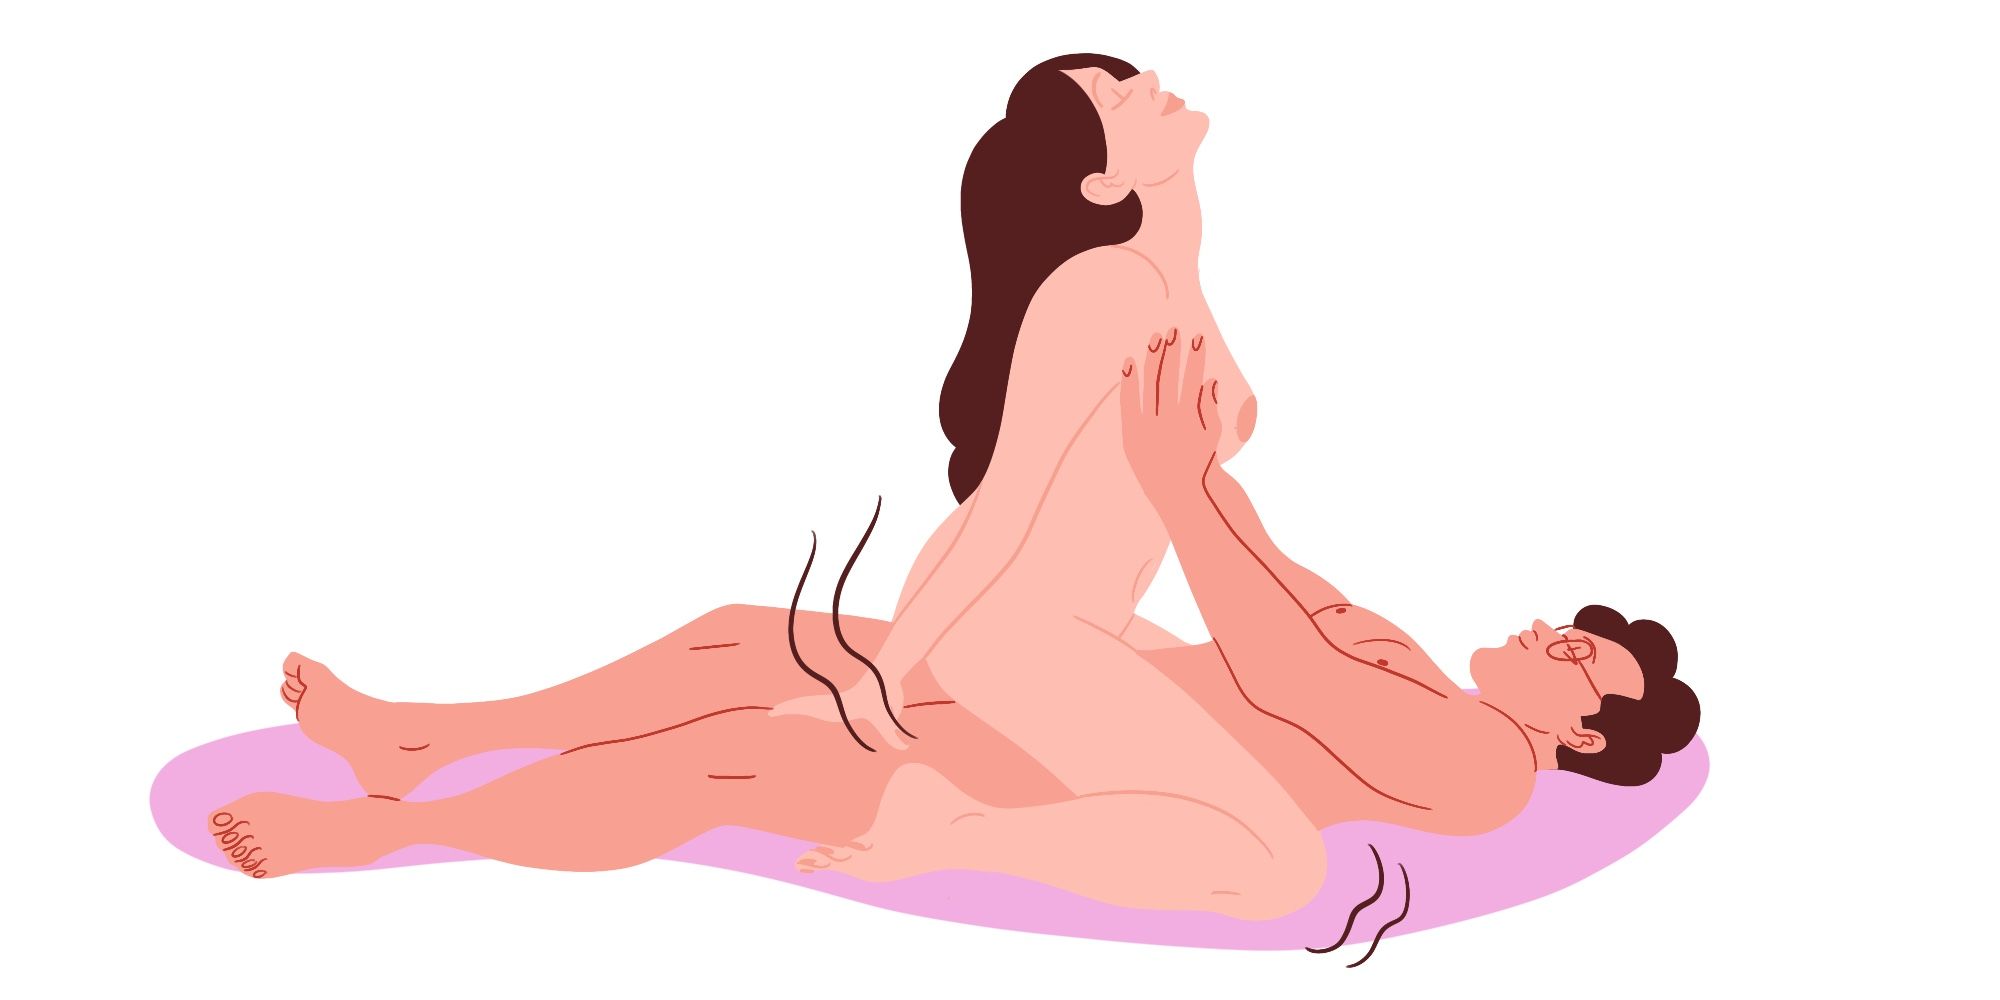 13 Cowgirl Sex Positions - How to Do the Cowgirl Sex Position